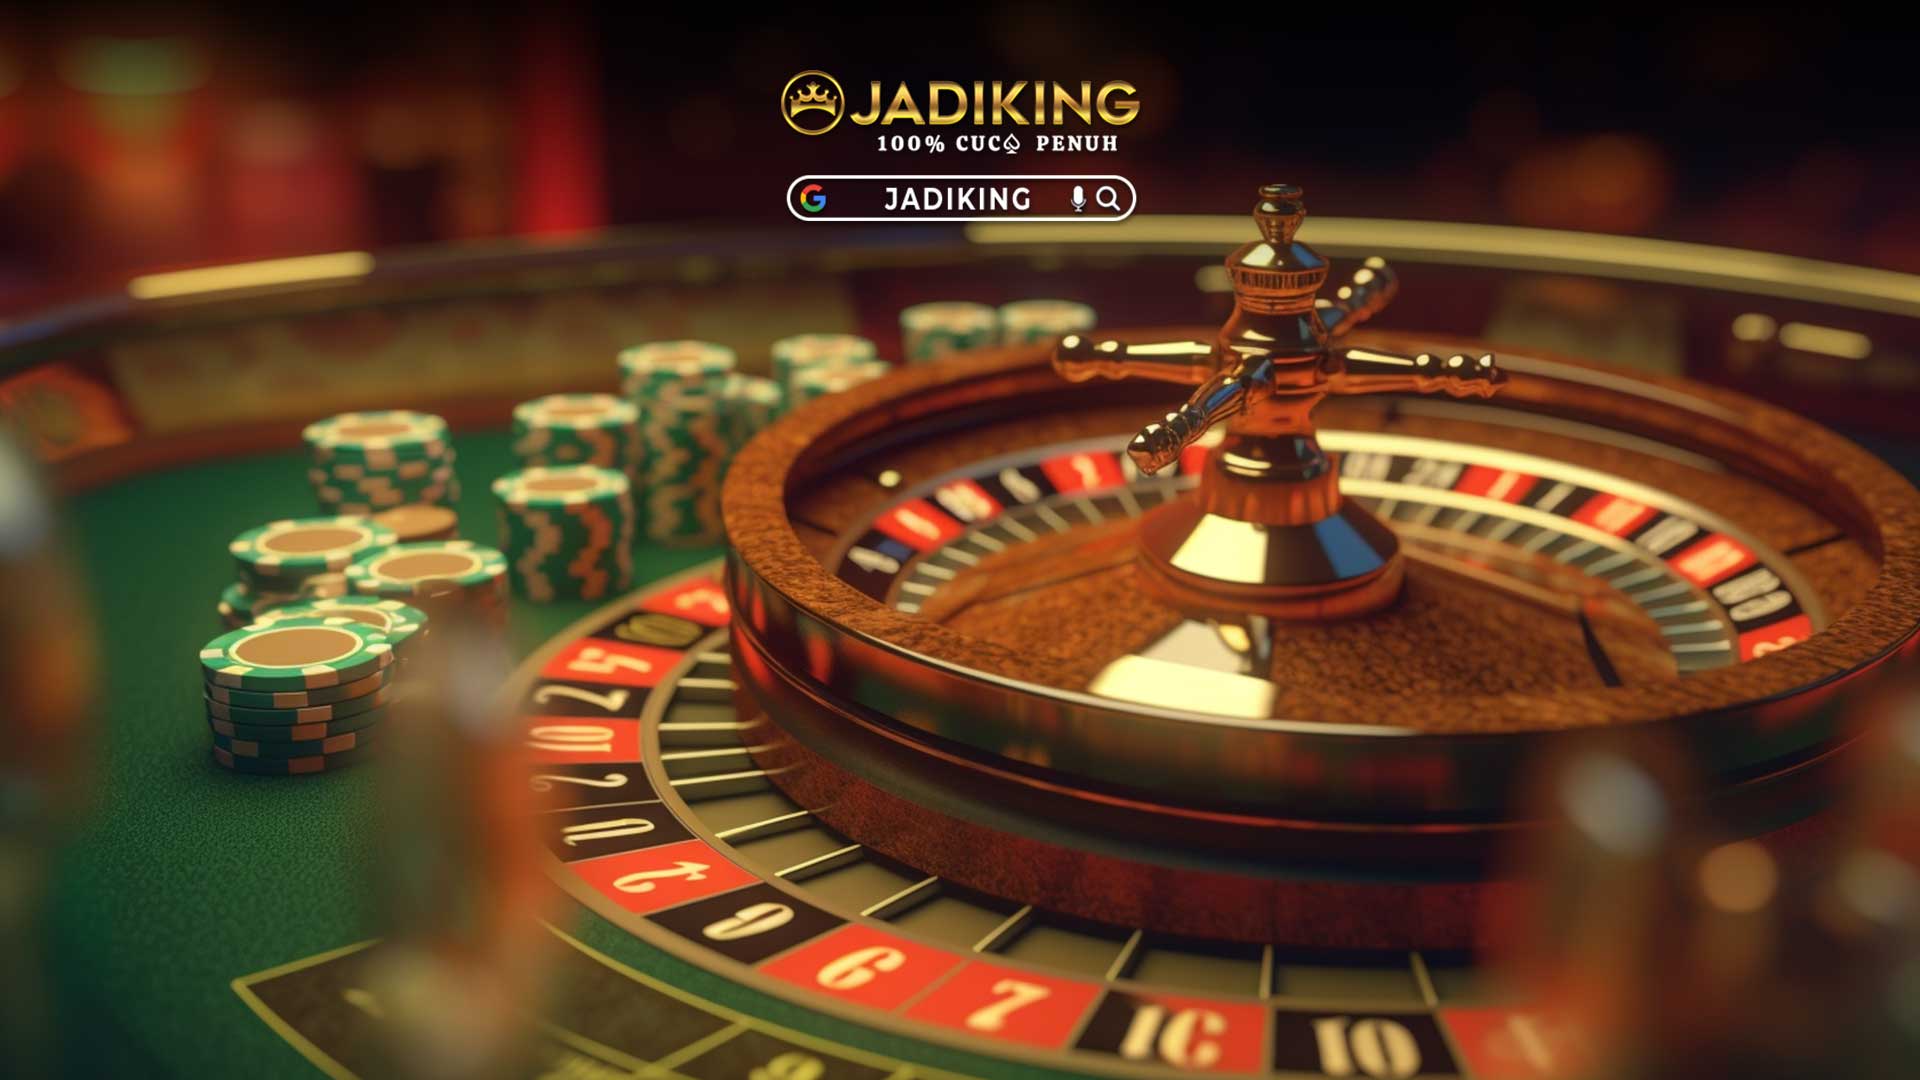 Jadiking88 Slot Malaysia: Your One-Stop Destination for Sportsbook, Slots, Live Casino, and Fish Games!